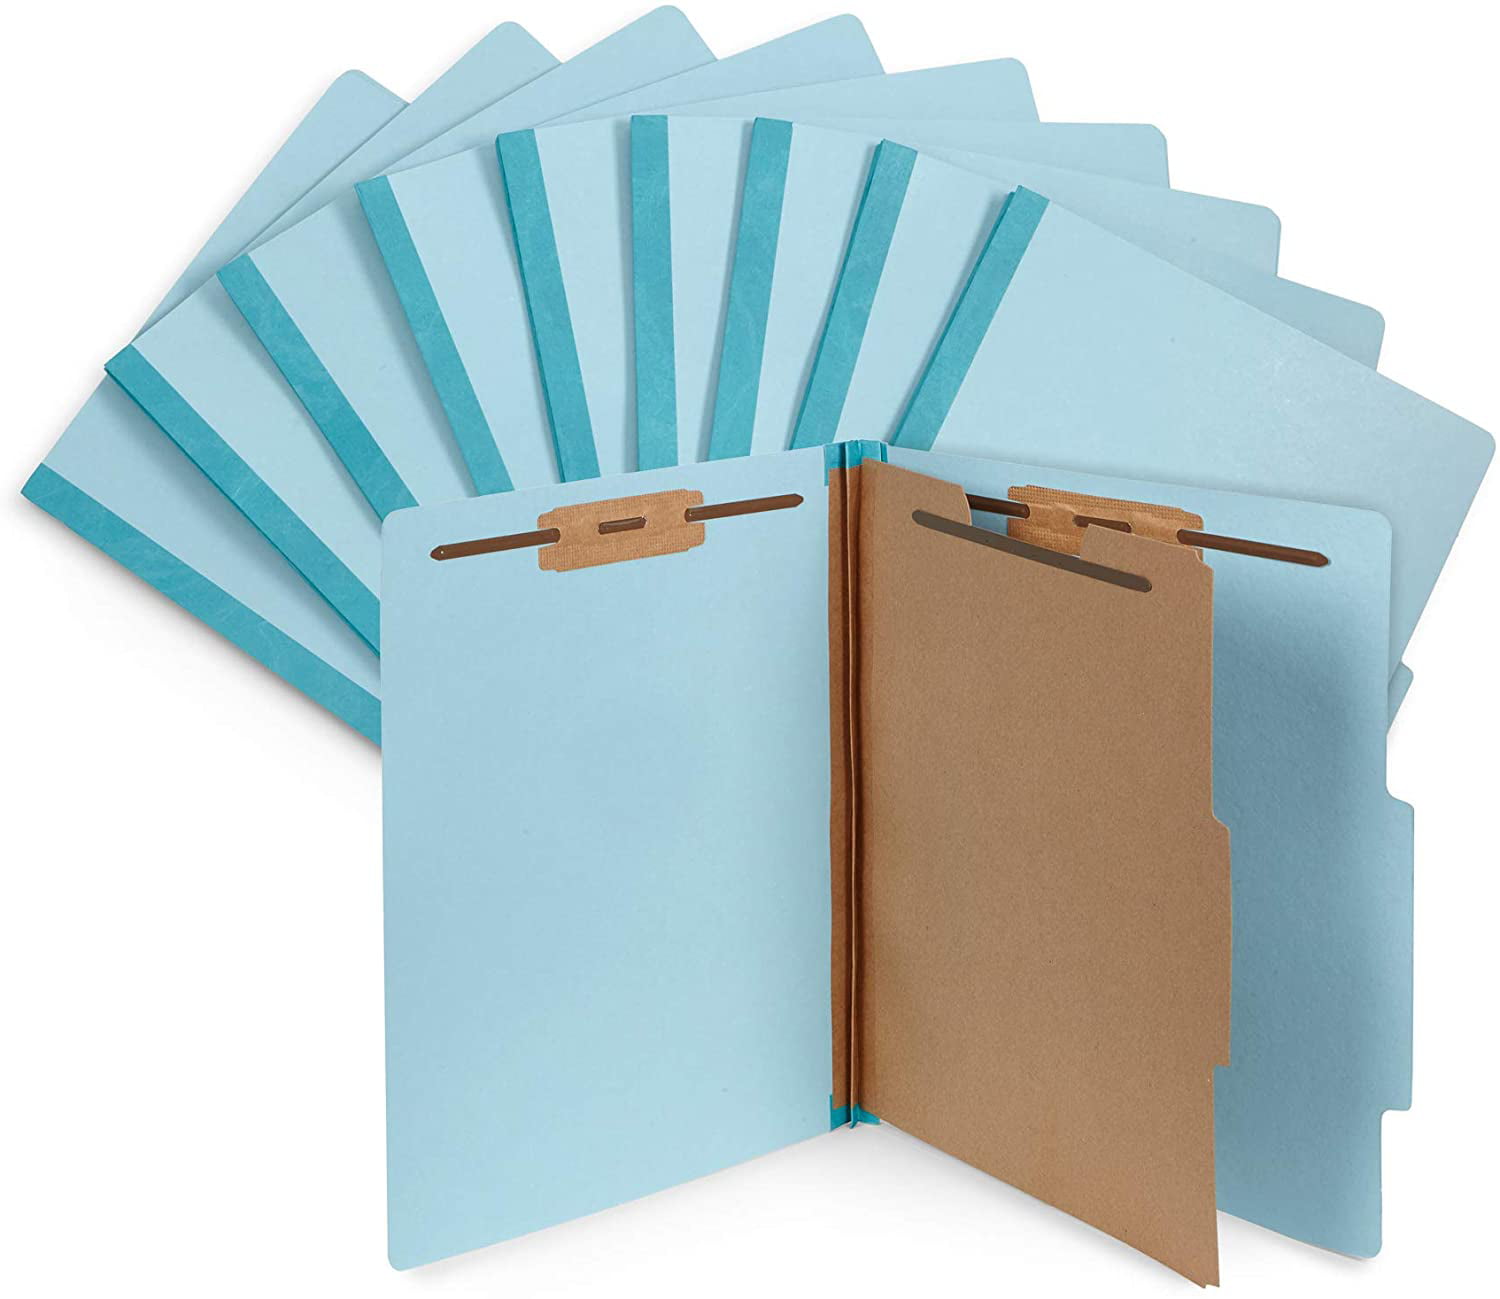 8 3/4 x 14 3/4 Office Reports- Legal Size 10 Folders 10 Blue Legal Size Classification Folders- 2 Divider-2?? Tyvek expansions- Durable 2 Prongs Designed to Organize Standard Law Client Files 